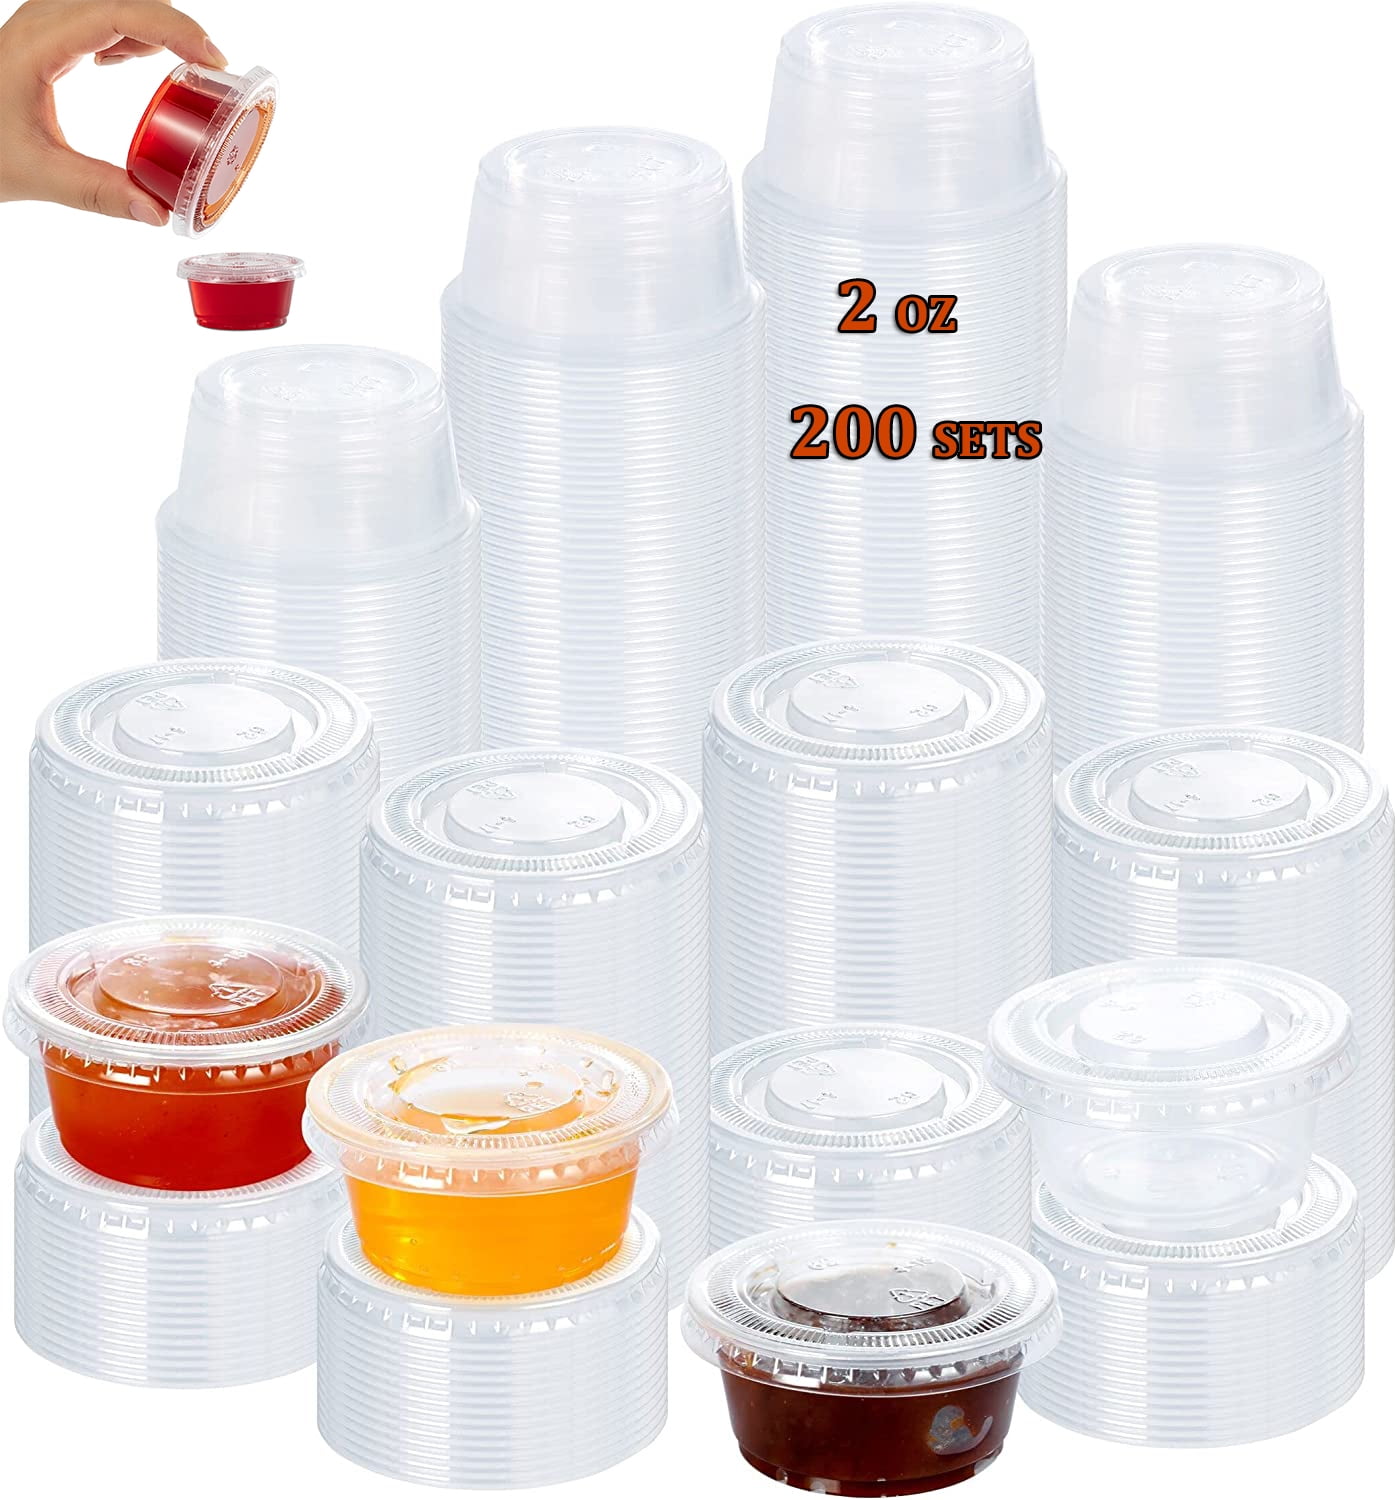 130 Sets - 2 Oz Jello Shot Cups, Small Plastic Containers with Lids,  Airtight and Stackable Portion Cups, Salad Dressing Container, Dipping  Sauce Cups, Condiment Cups for Lunch, Party to Go, Trips 2oz - 130